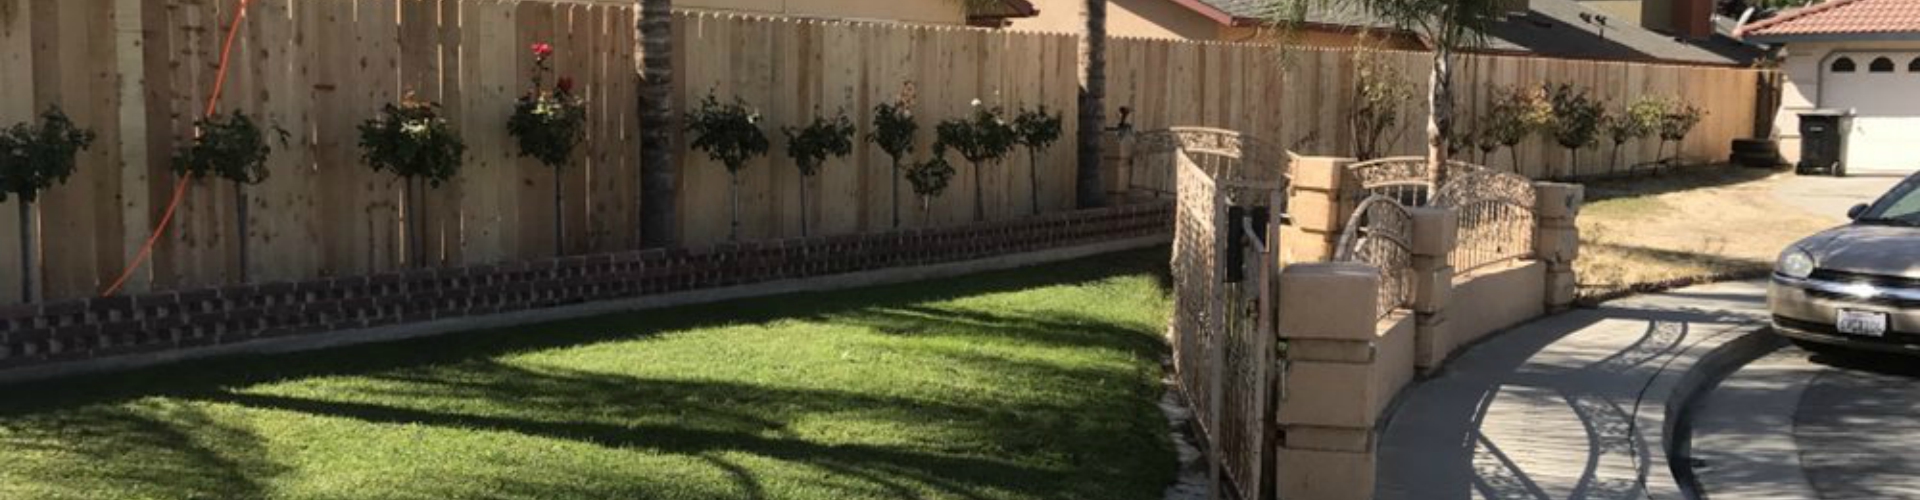 Top Choice Fencing, Inc - contact-us